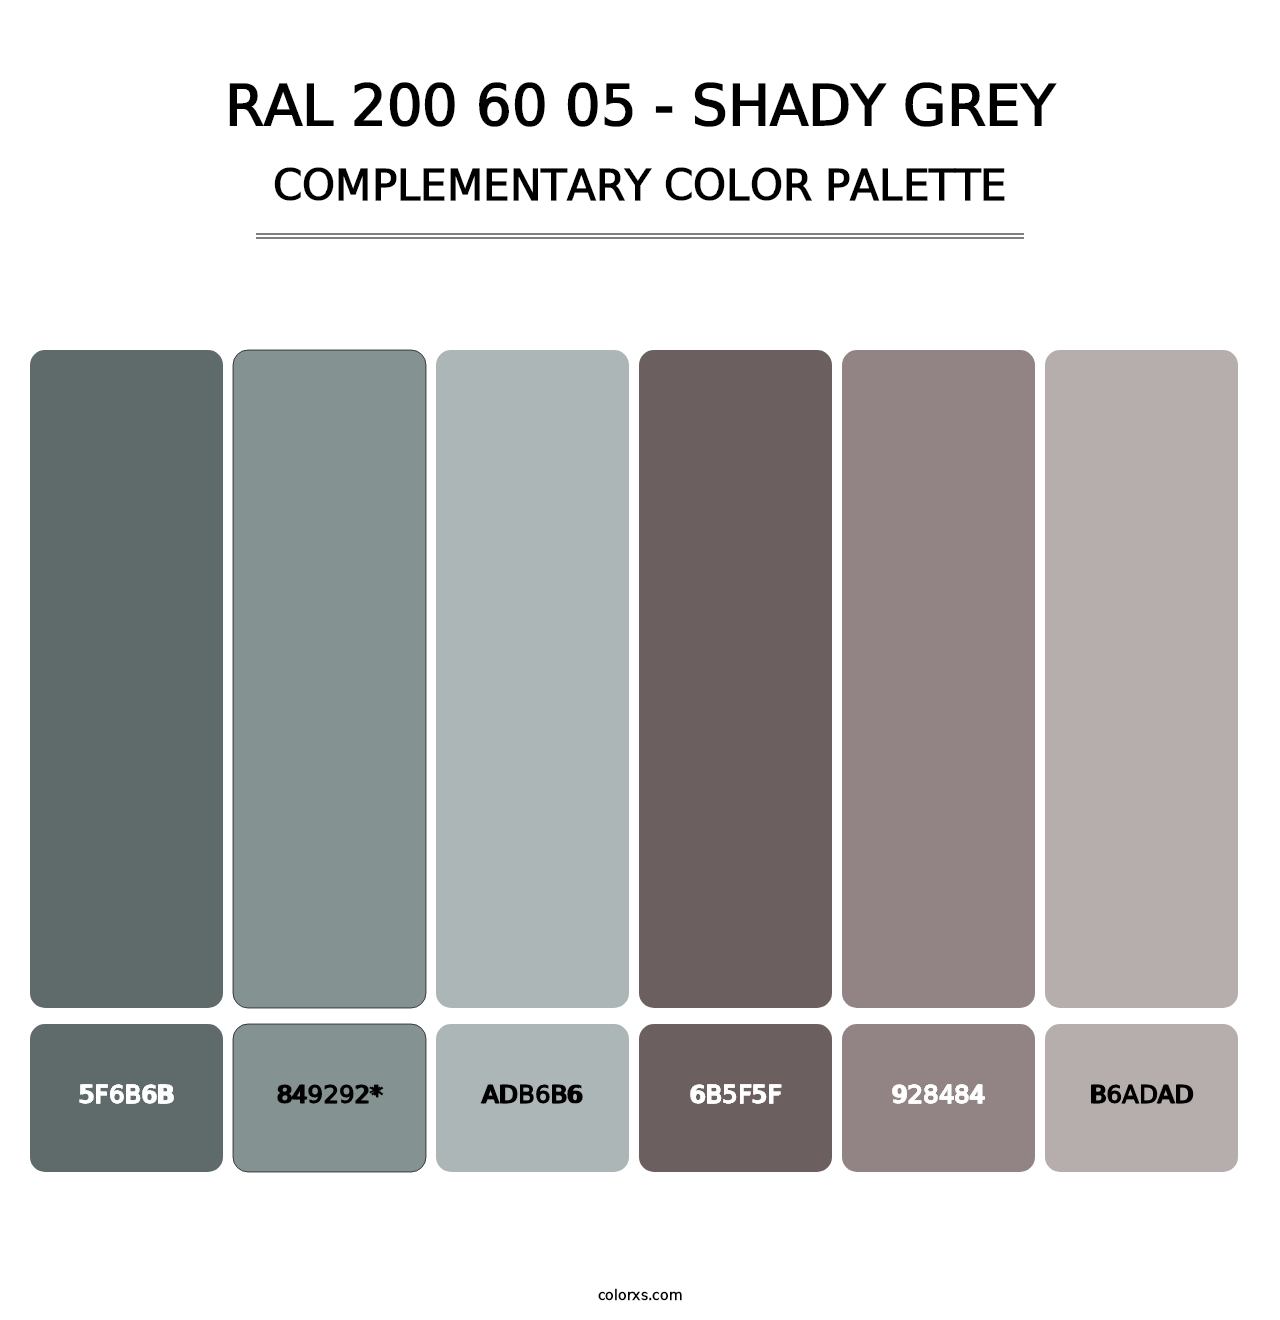 RAL 200 60 05 - Shady Grey - Complementary Color Palette